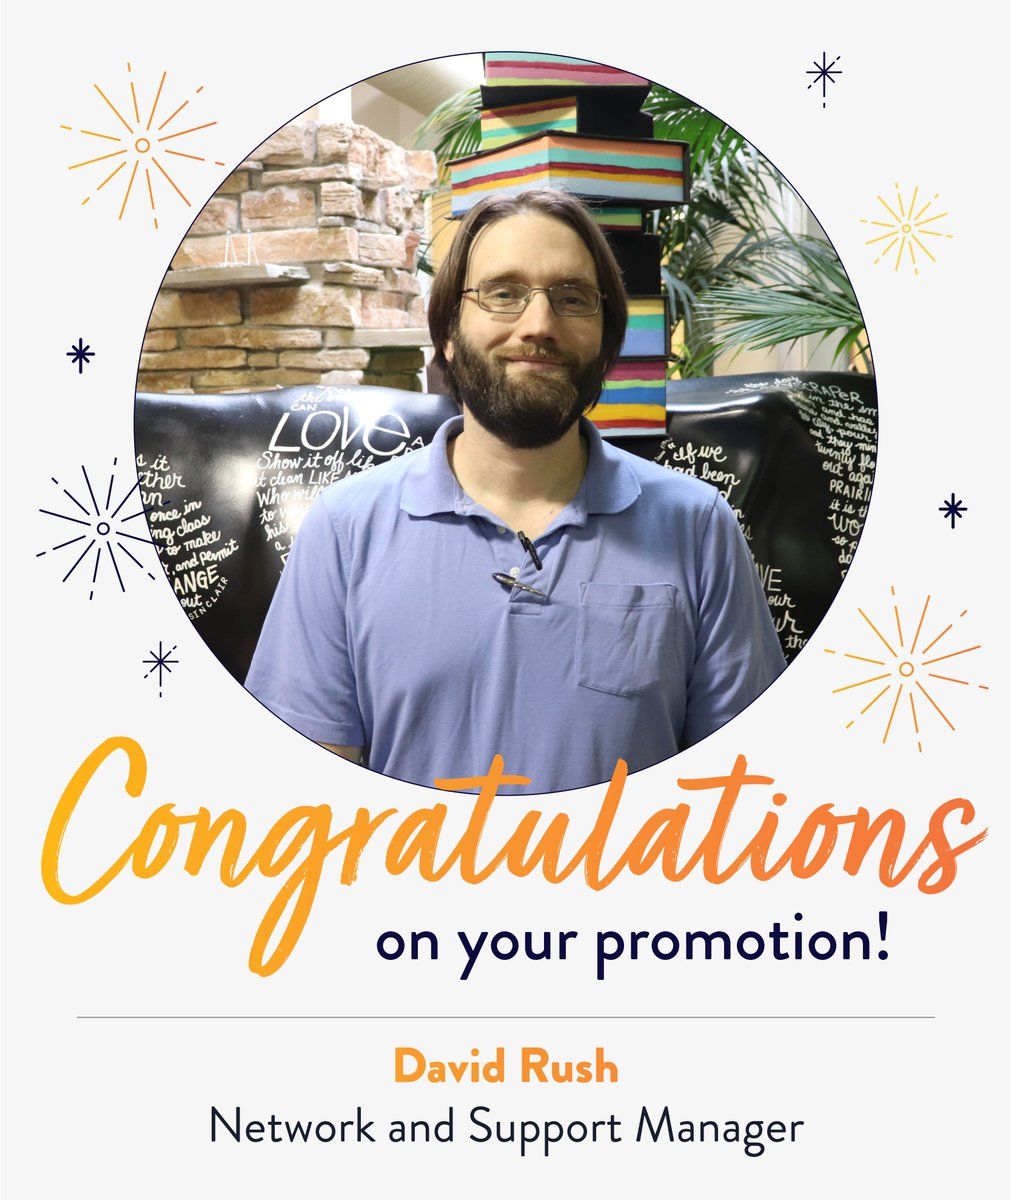 🎊Join us in celebrating the #promotion of David Rush to Network & Support Manager! 📚Since joining our team, David has led many successful projects & plays a key role in maintaining seamless IT operations. In his new role, he'll manage some of our most critical tech projects.